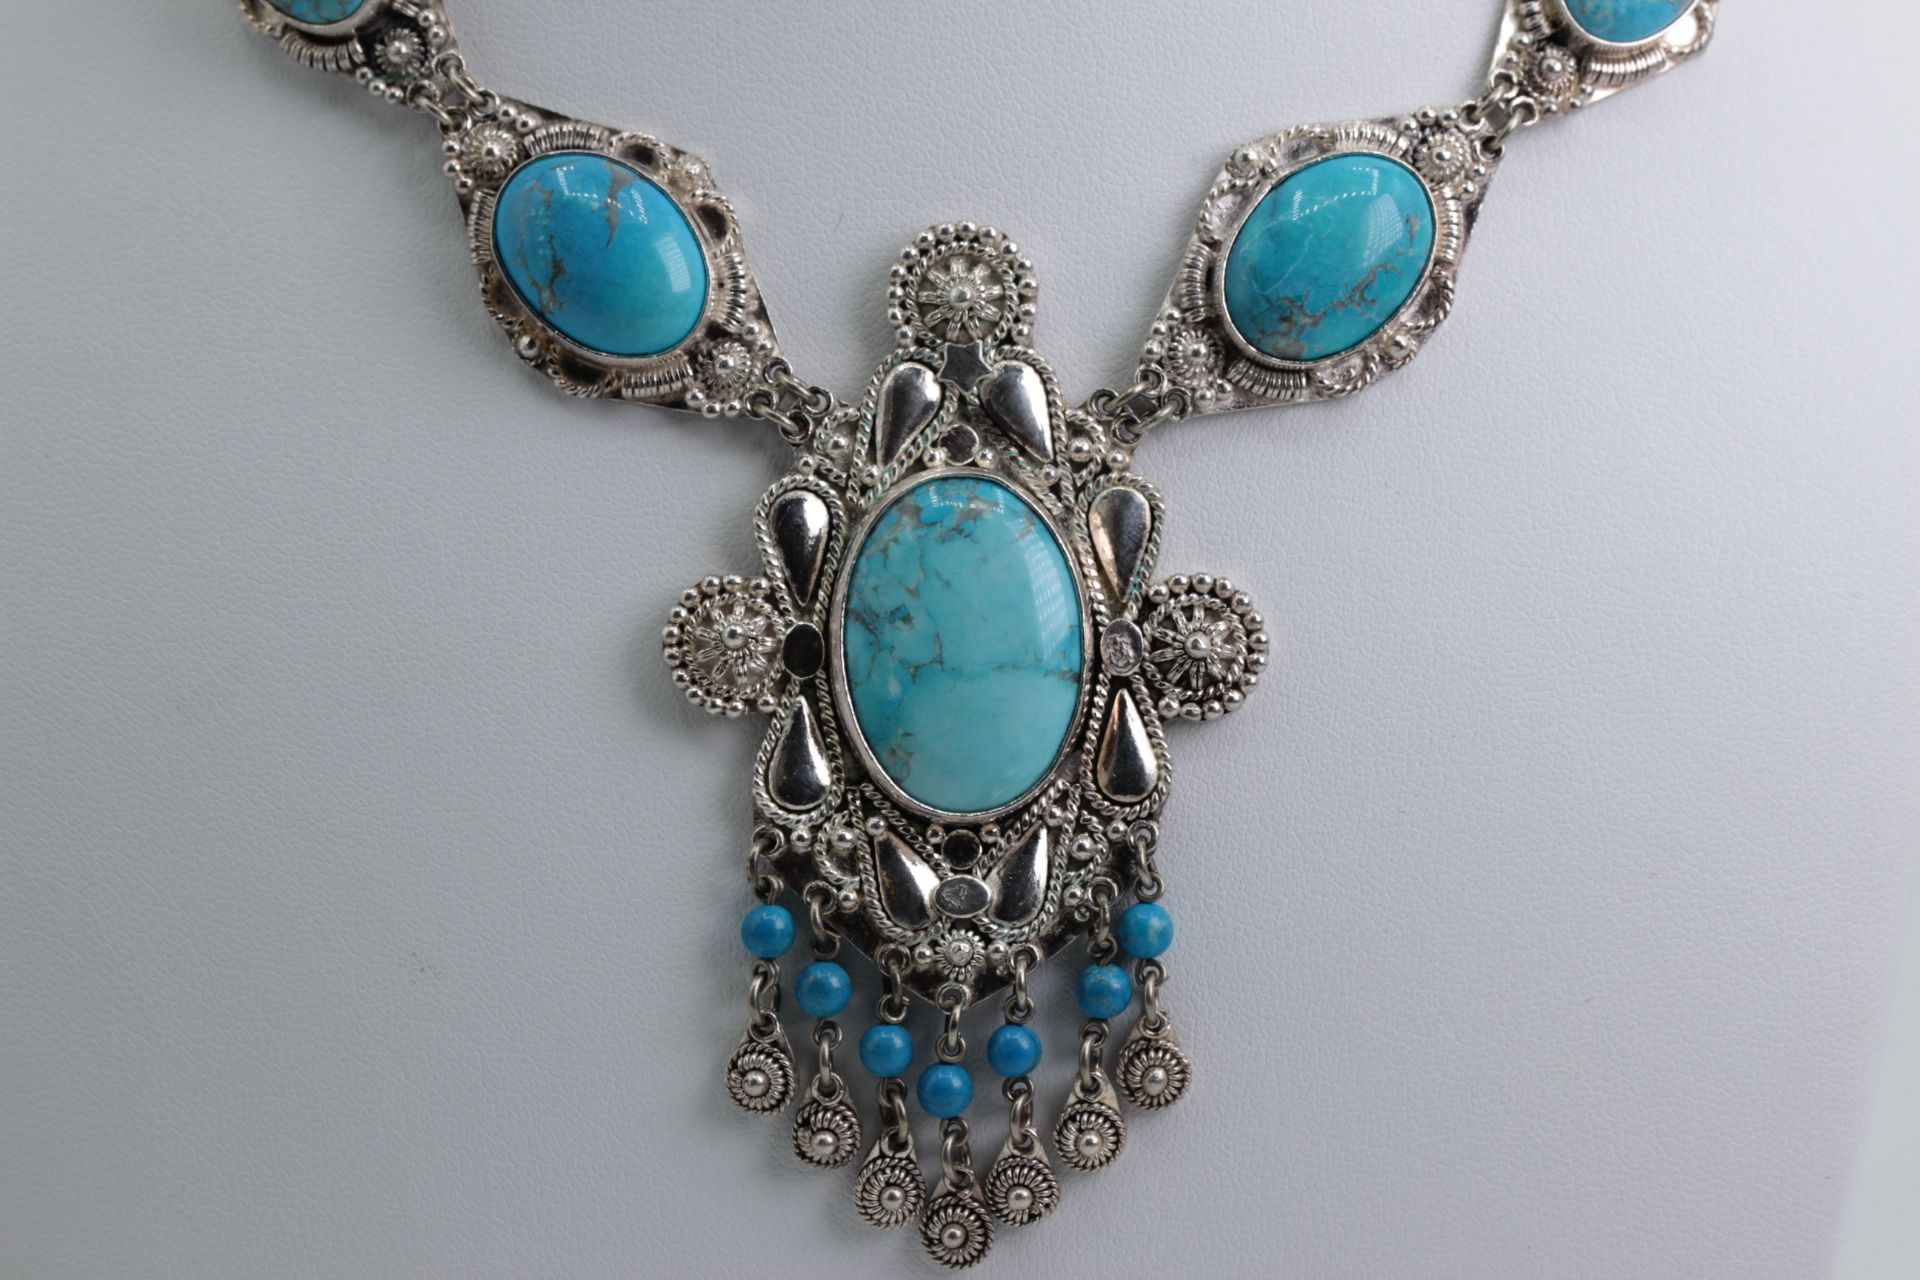 Silver necklace, oriental, with turquoise colored Stones - Image 2 of 5